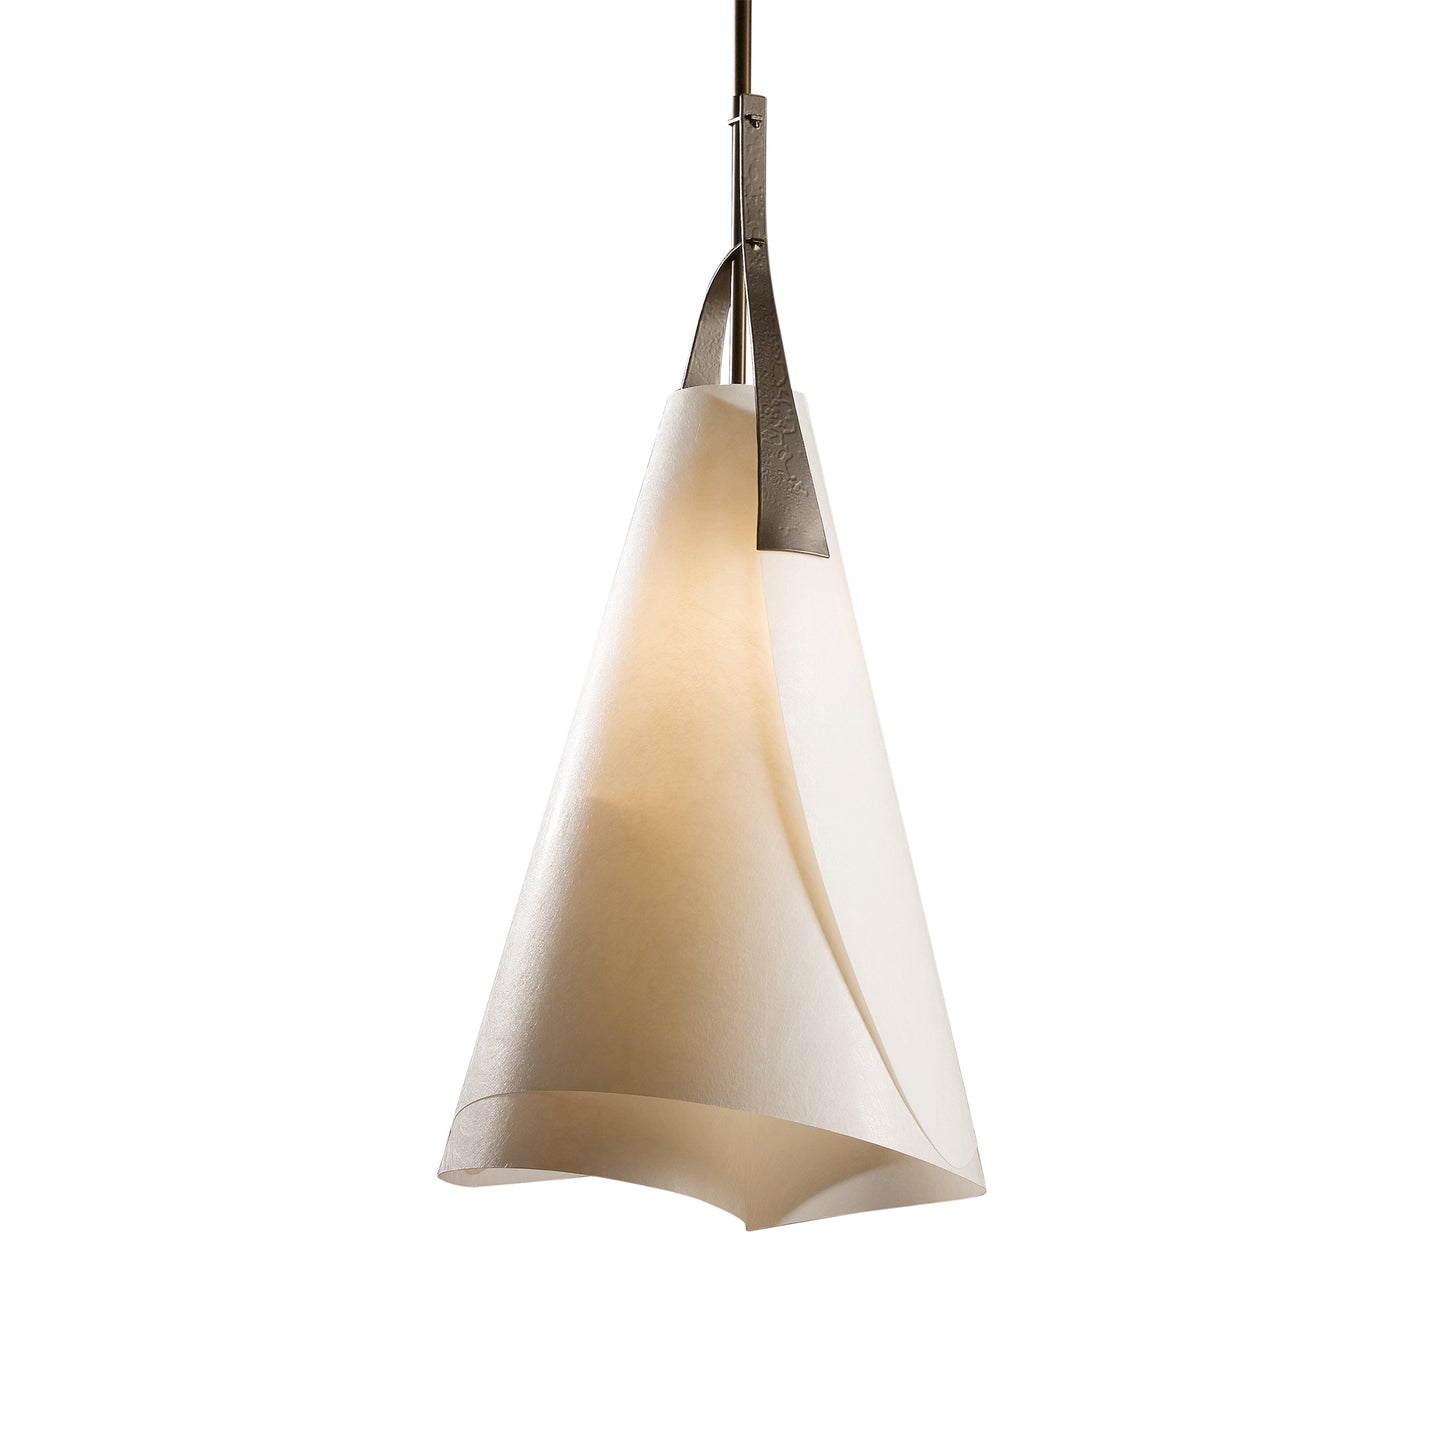 A handcrafted Mobius Tall Pendant with a white shade hanging from it by Hubbardton Forge lighting.